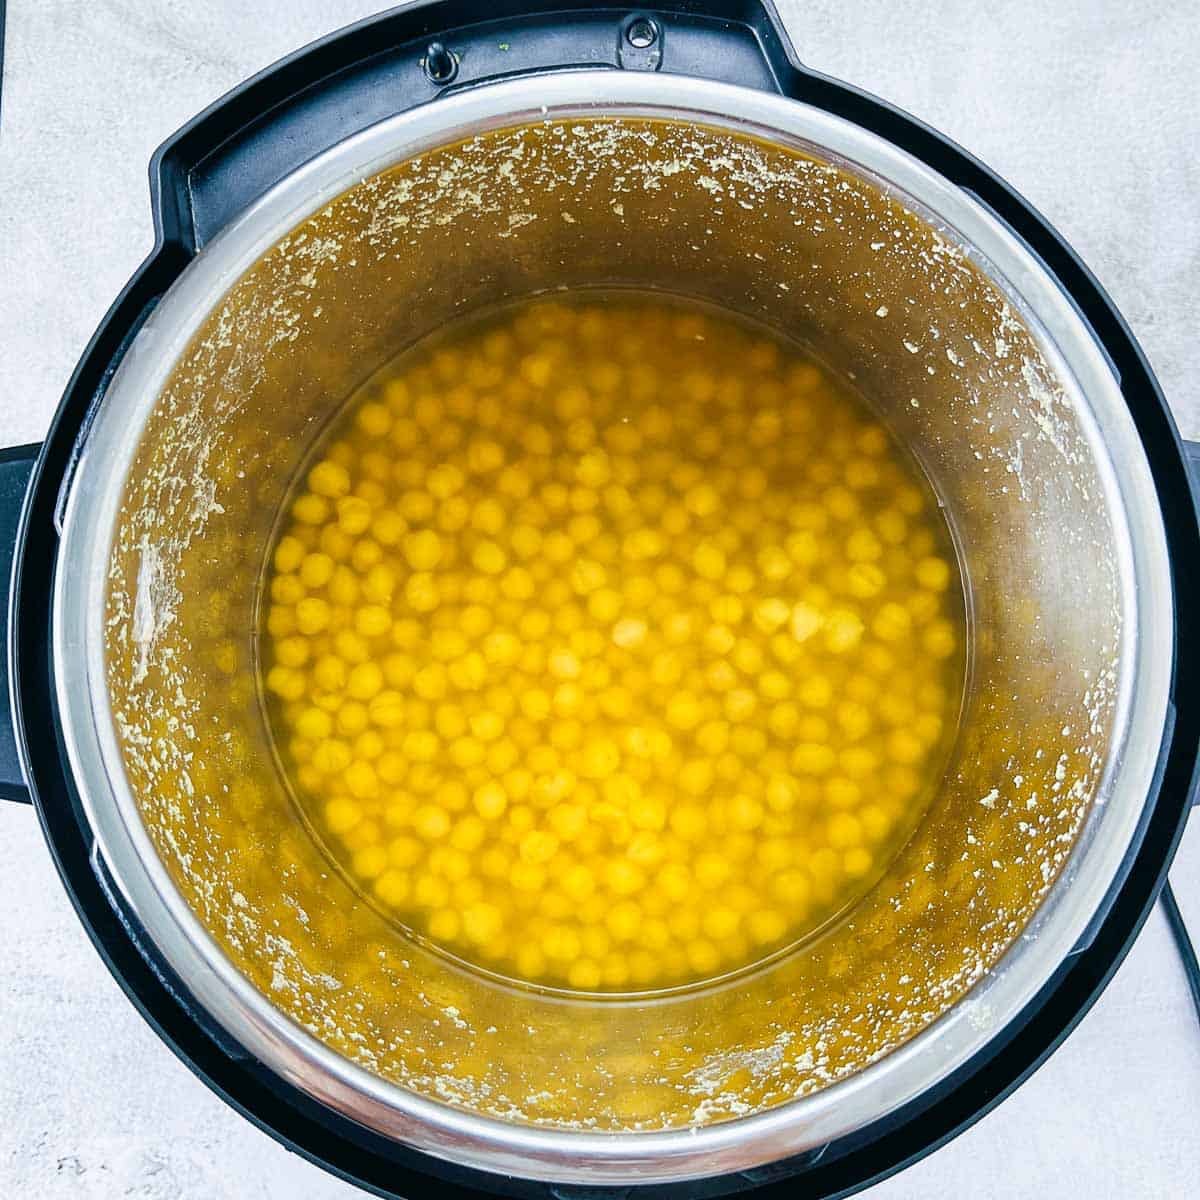 Cooked chickpea in the Instant Pot.